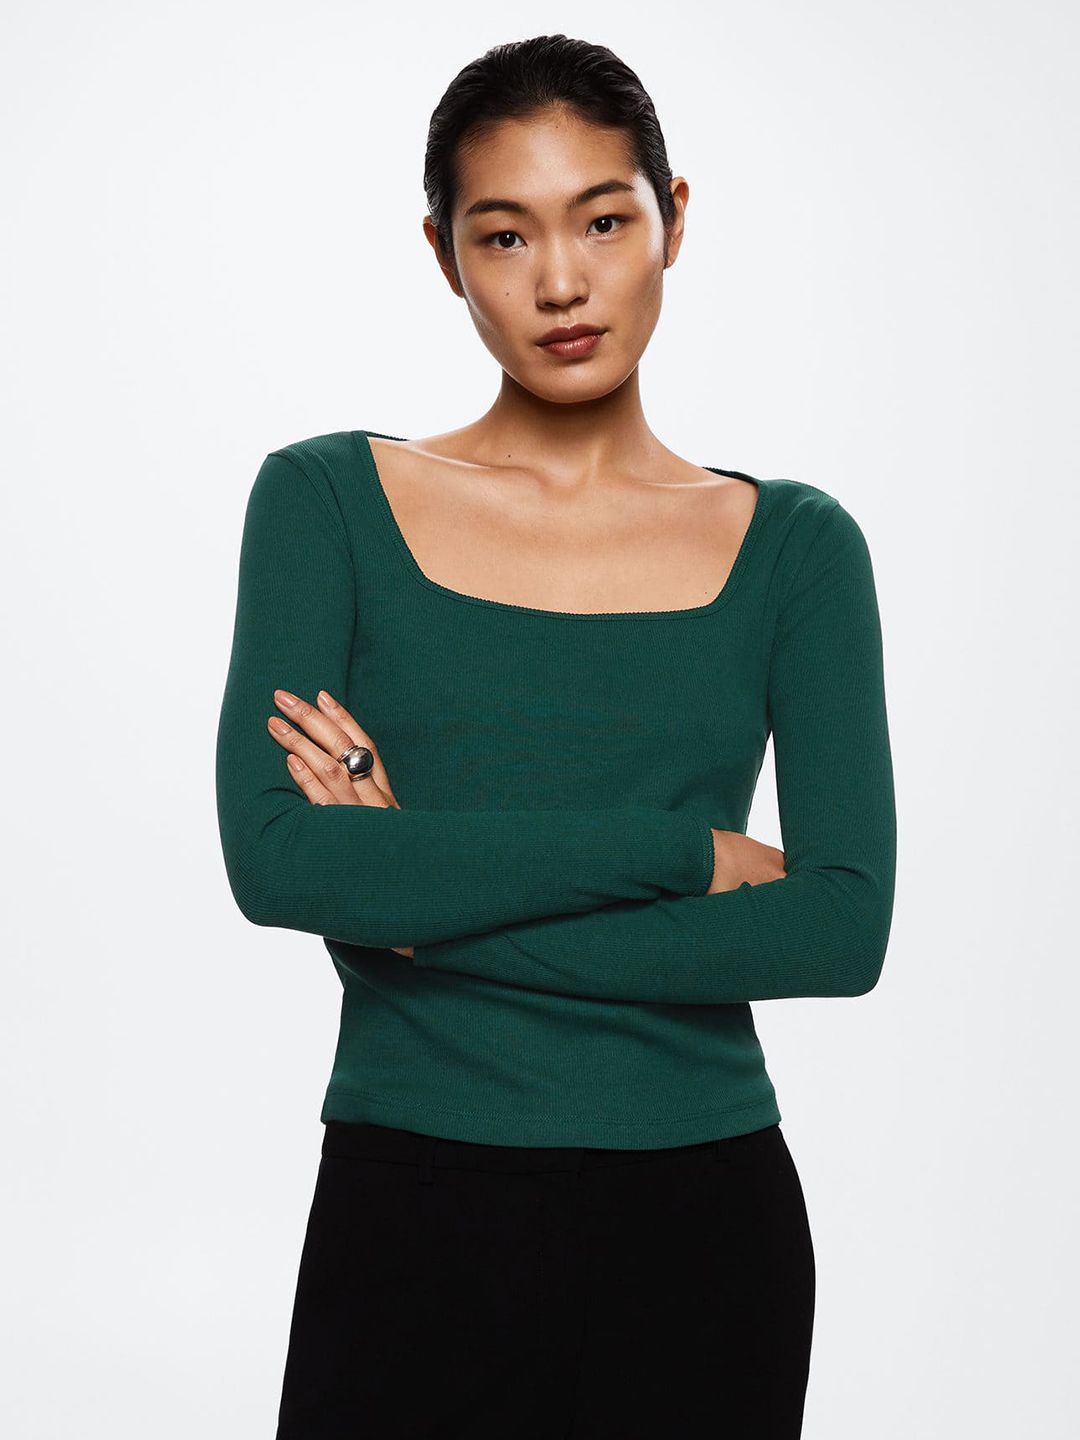 MANGO Green Solid Sustainable Top Price in India